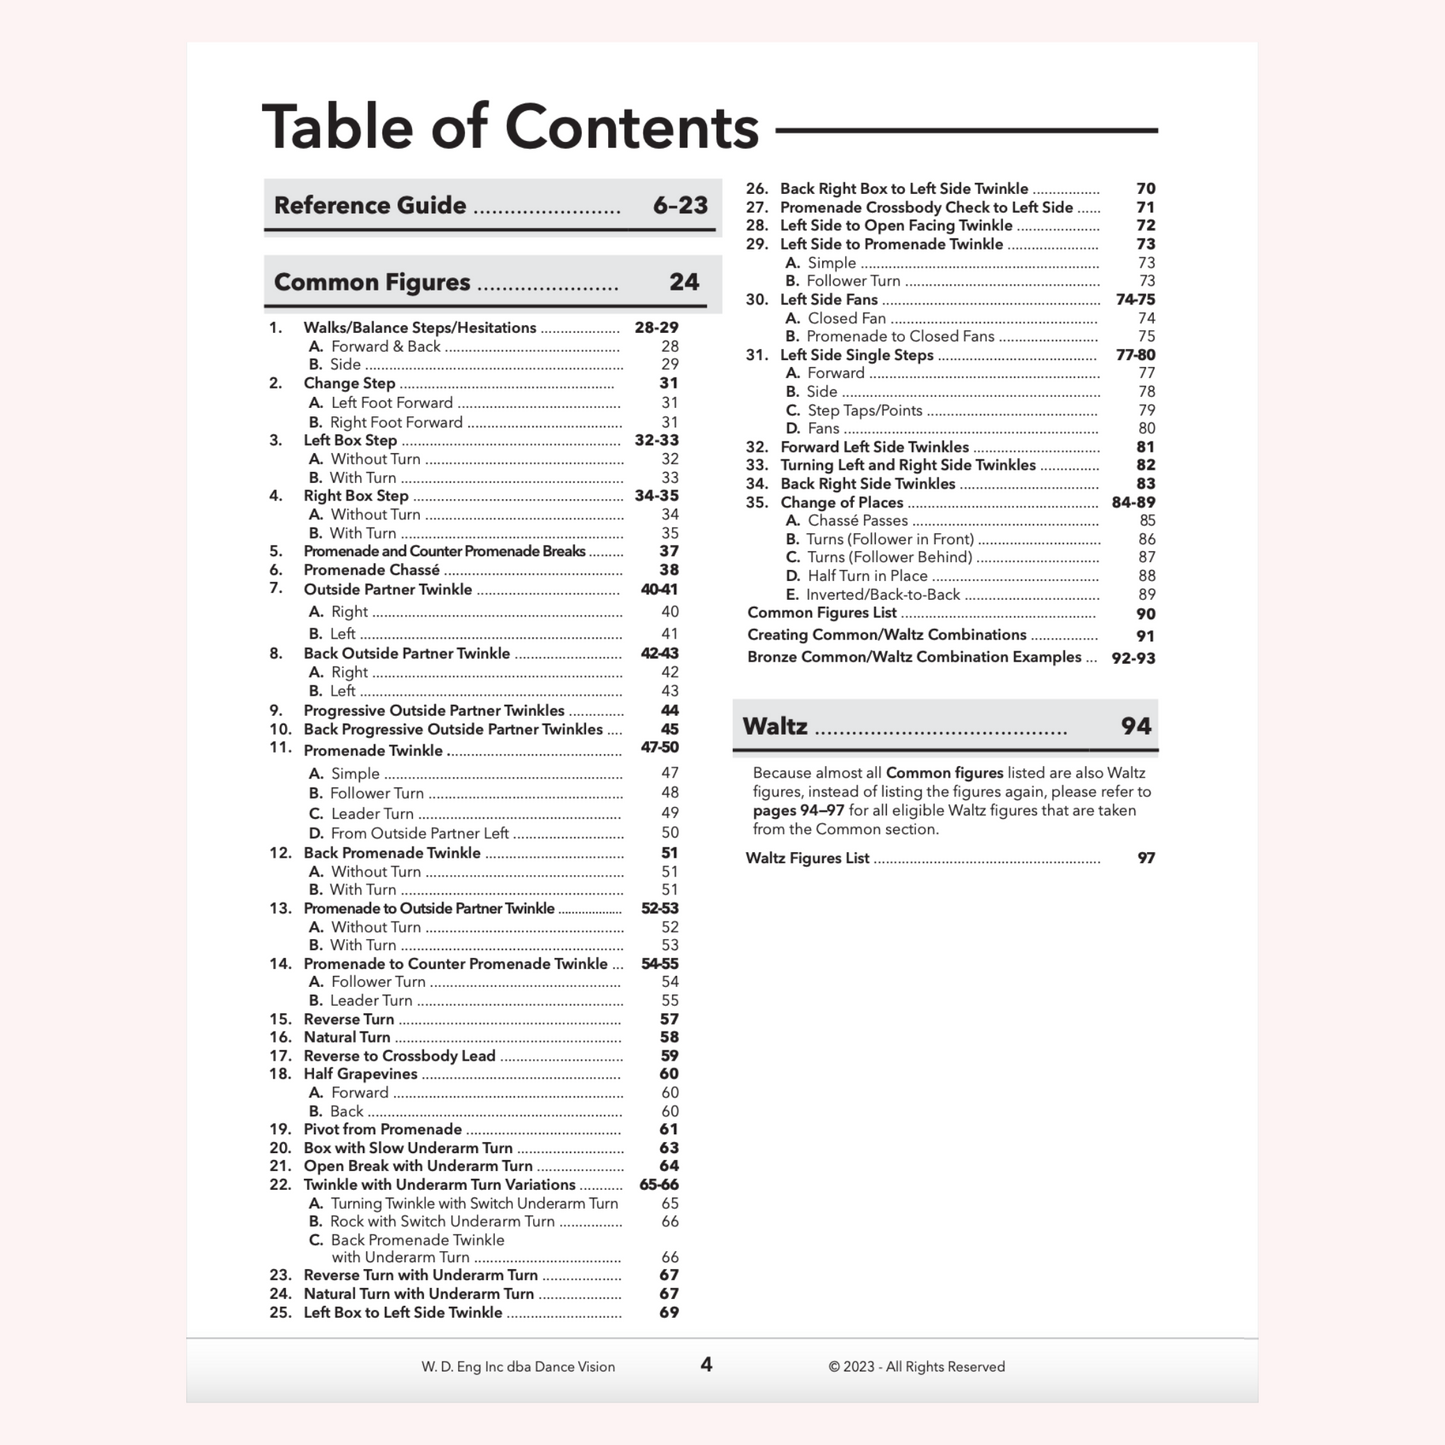 Table of contents example.